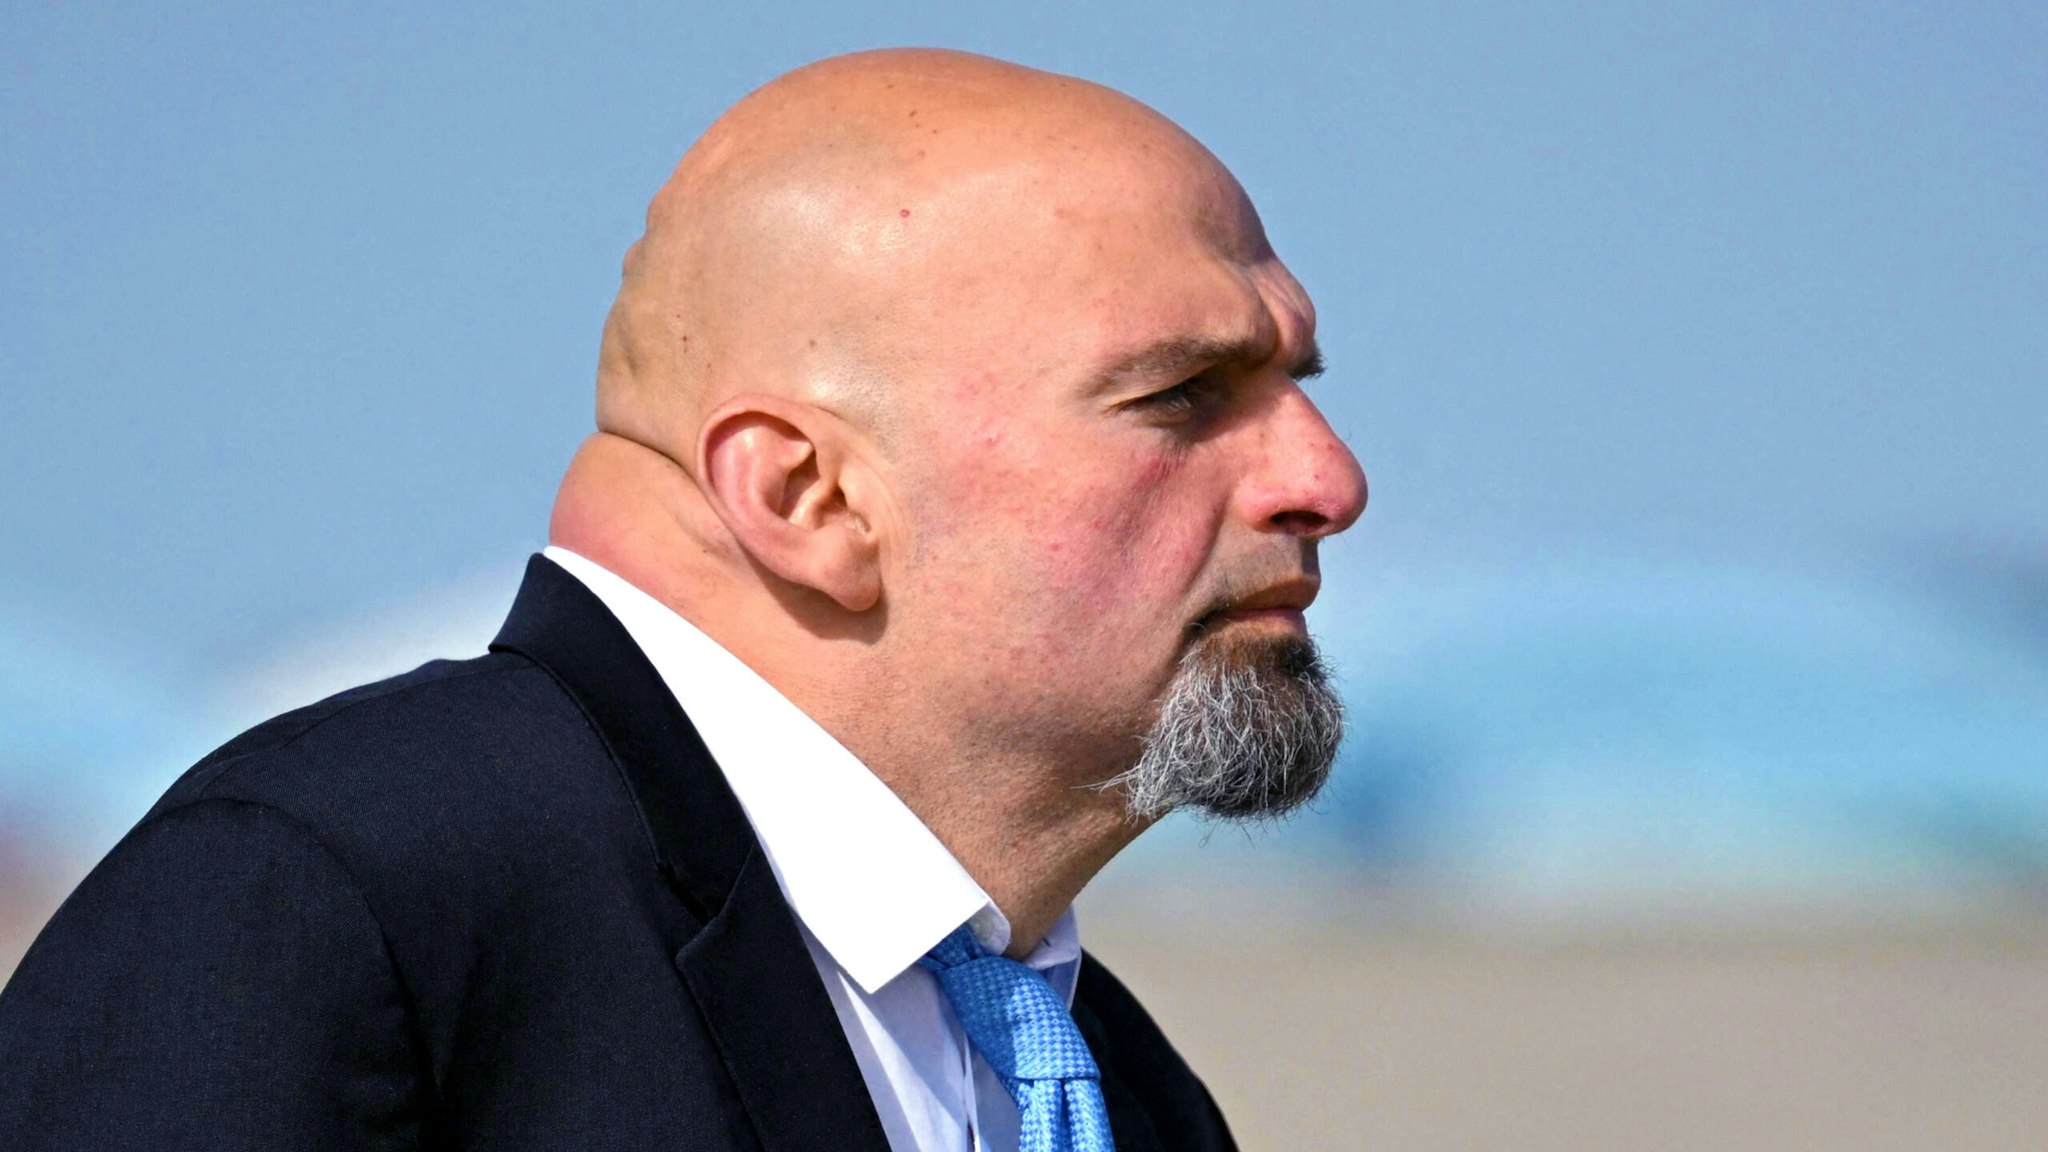 Pennsylvania Lt. Gov. and Democratic senatorial candidate John Fetterman waits for US President Joe Biden to step off Air Force One at Pittsburgh International Airport in Pittsburgh, Pennsylvania, on October 20, 2022.